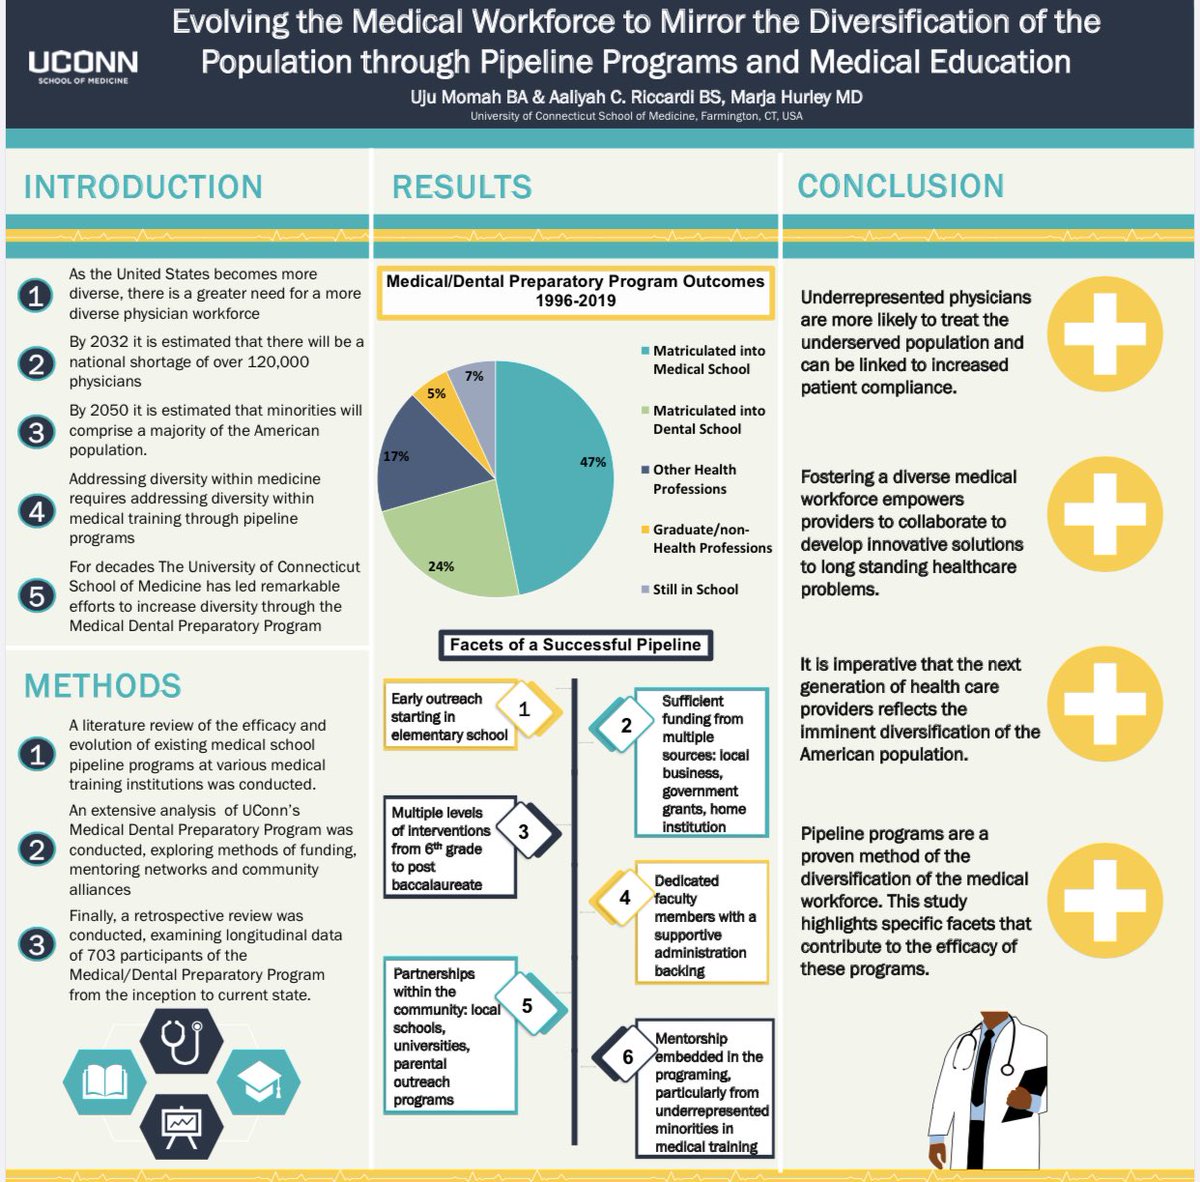 Interrupting your doom scrolling to share our poster accepted to @AAMCtoday Learn Serve Lead Annual Meeting! ✨ @UjuMomah 

It explores facets of the very successful pipeline program our institution has implemented as a blueprint for other schools! #LiftAsWeClimb #AAMC20